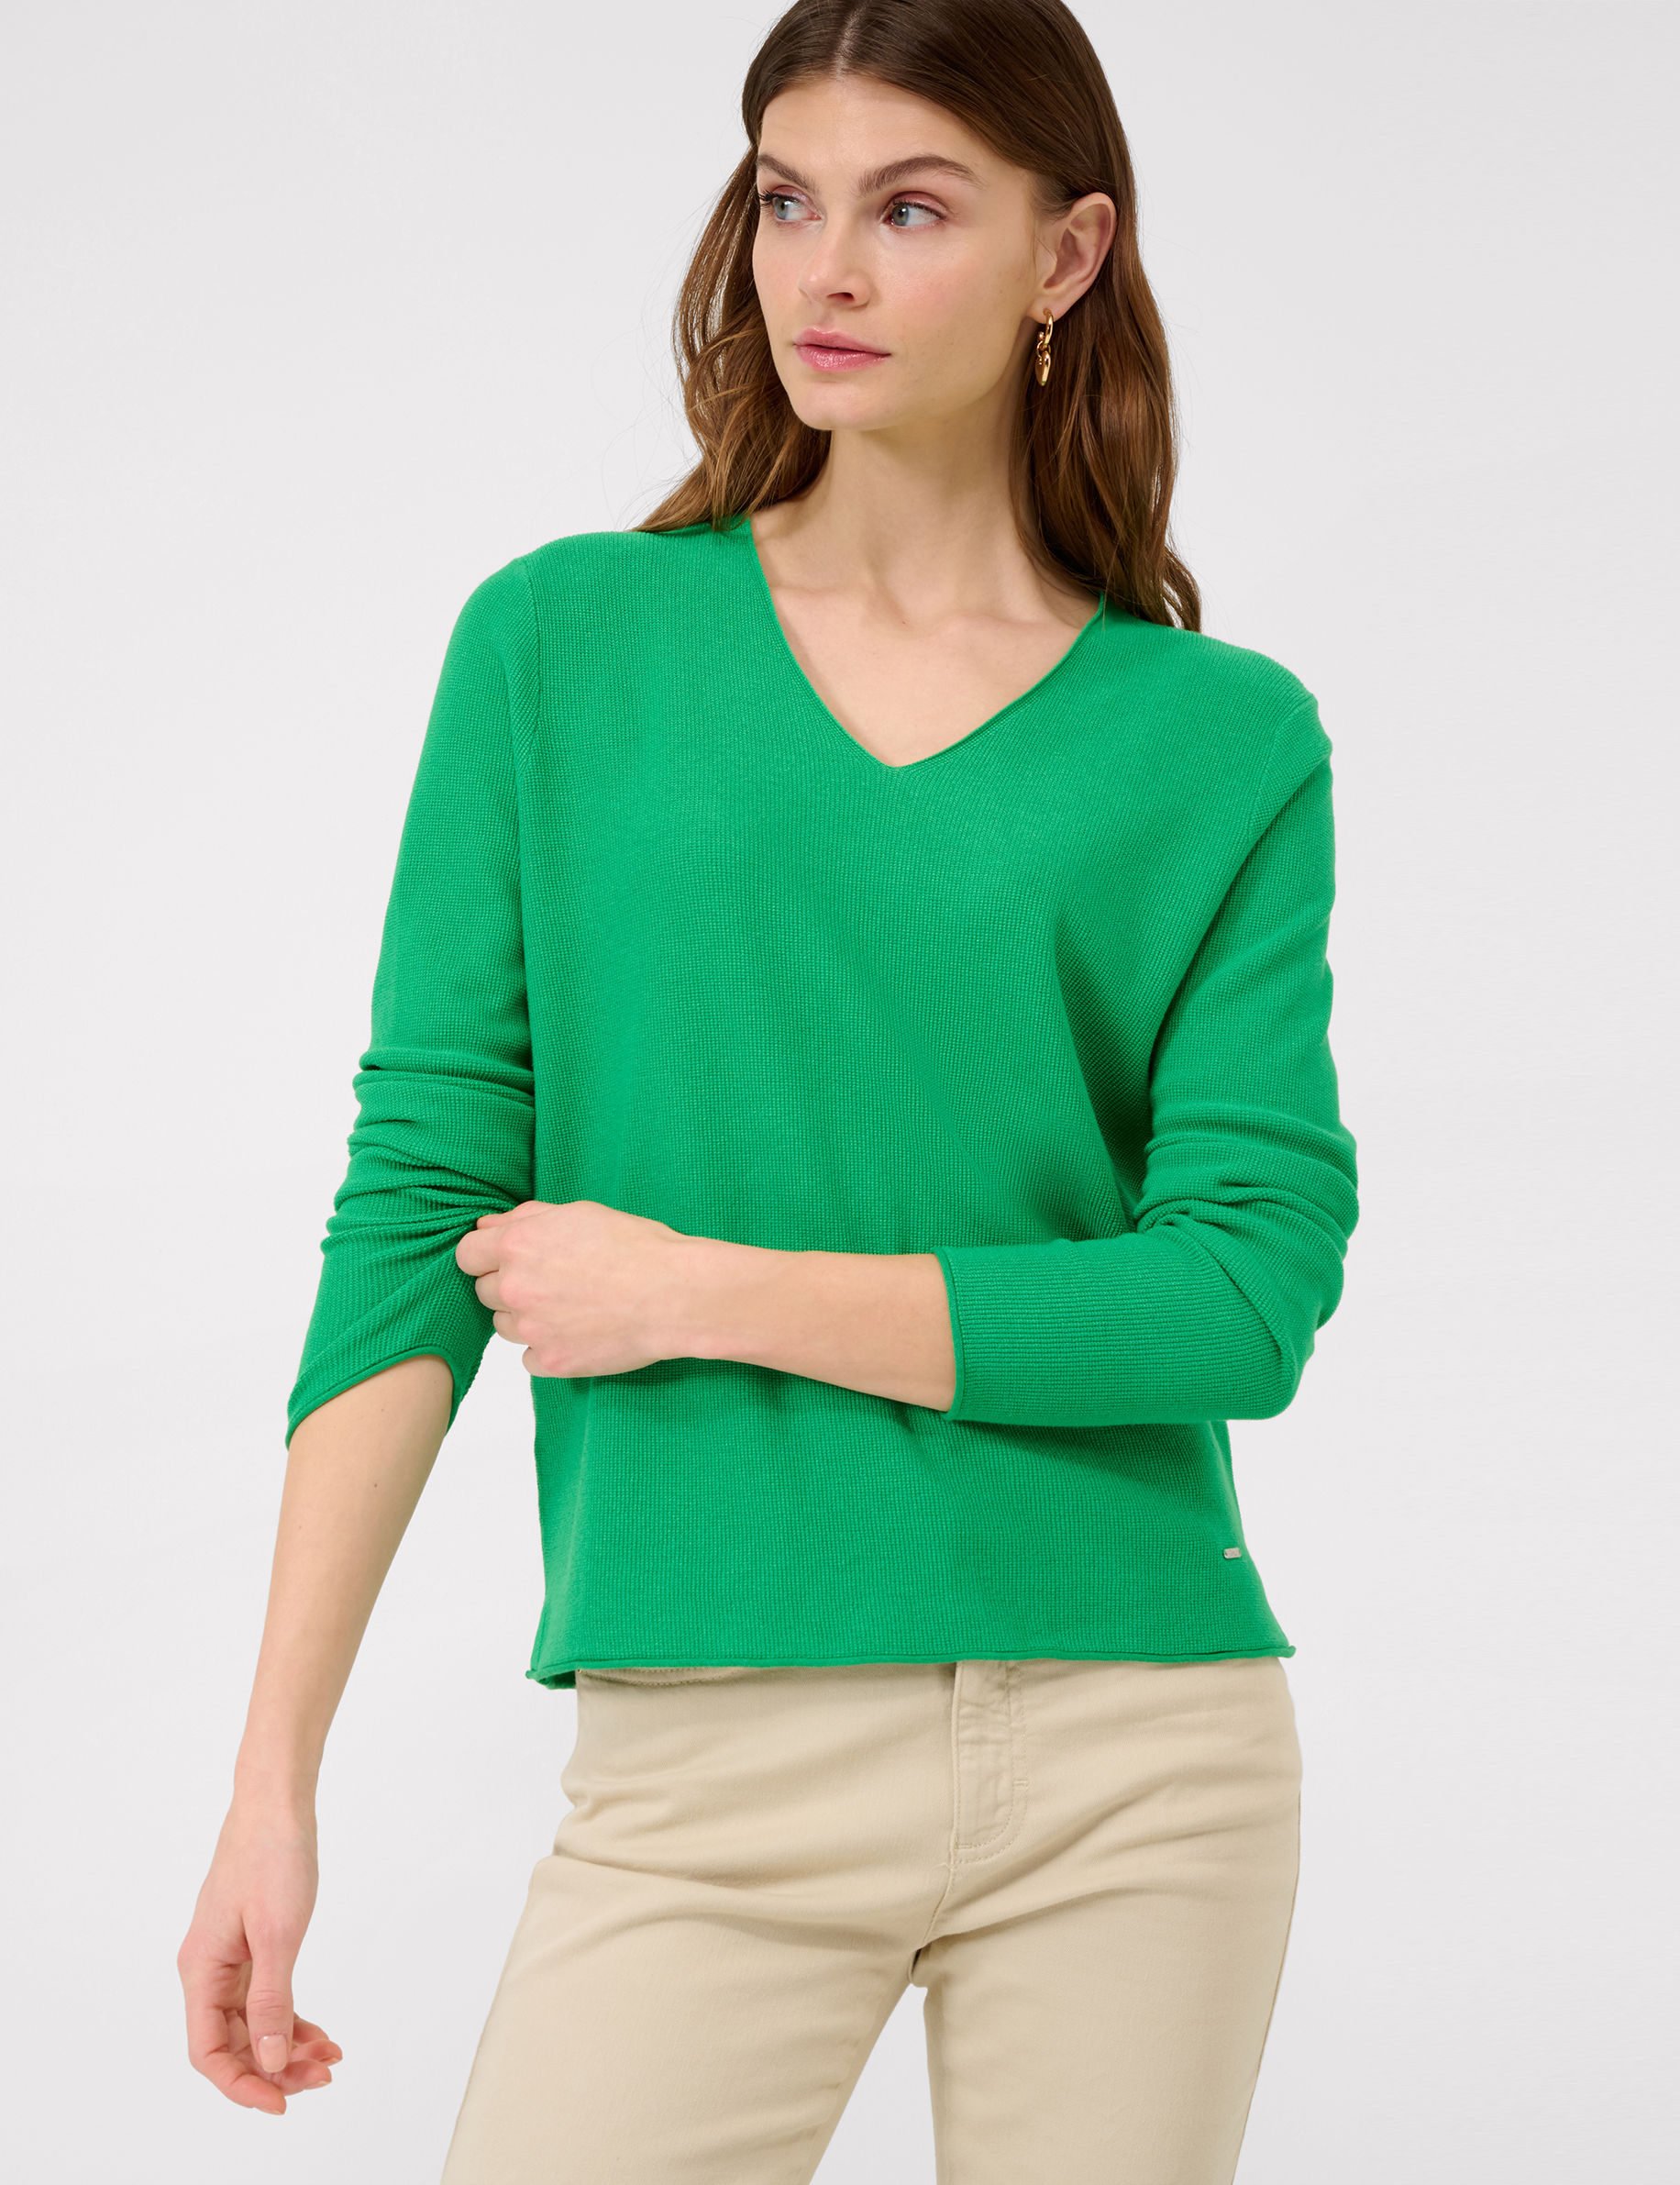 Shades of green, Women, Style LESLEY, MODEL_FRONT_ISHOP